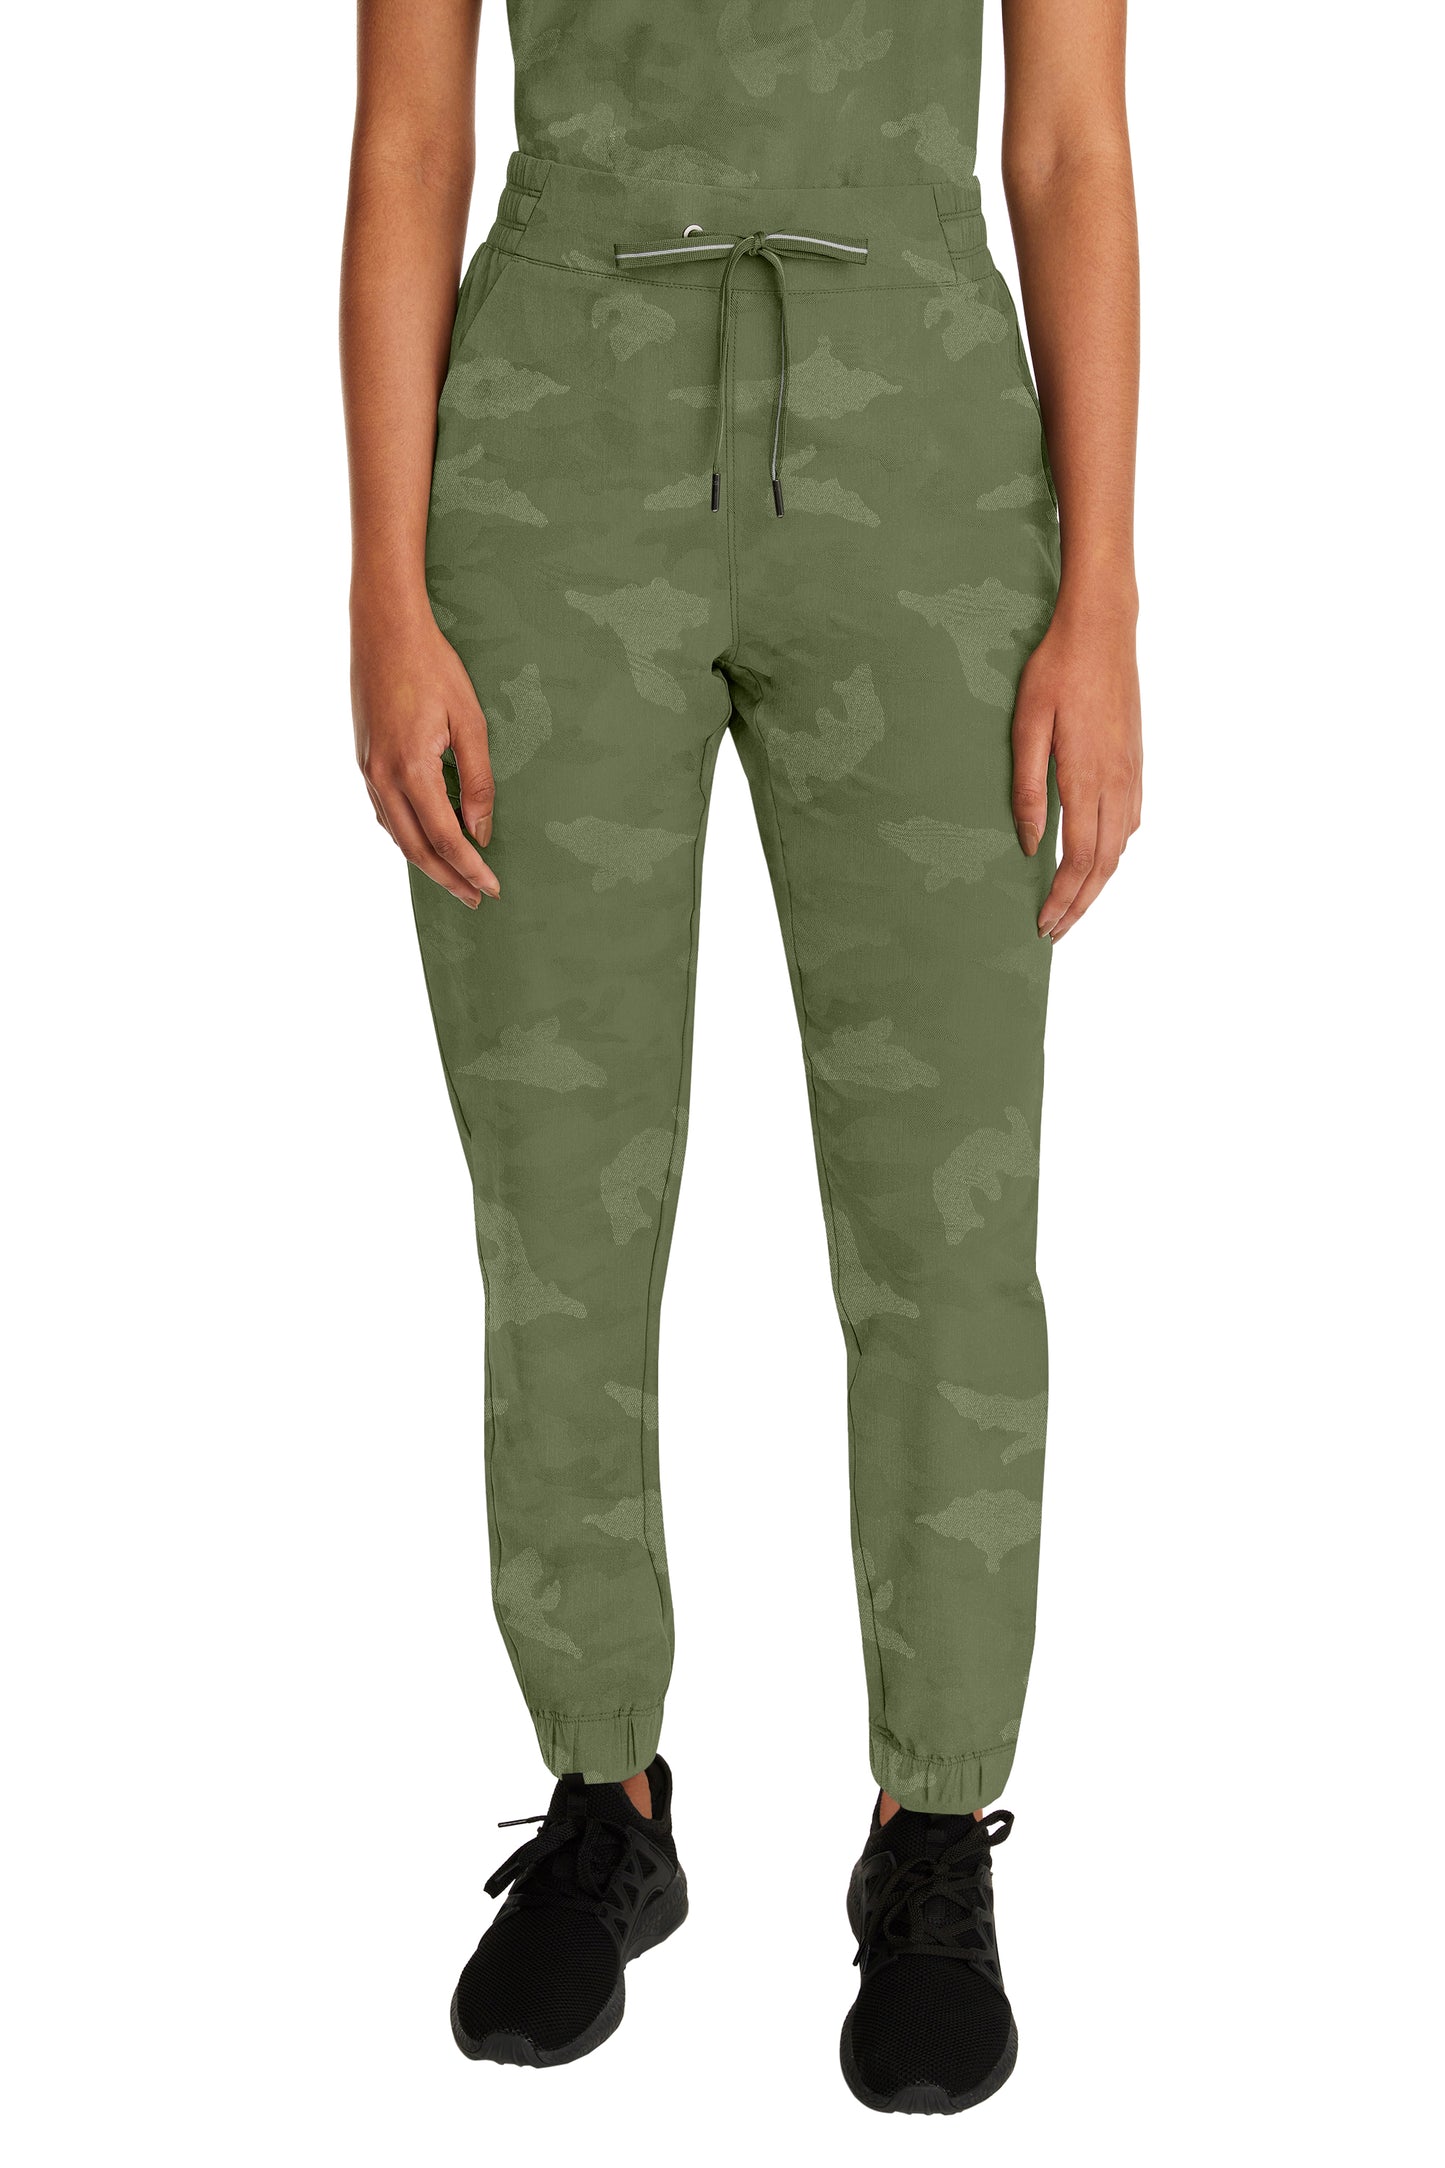 Healing Hands Purple Label Camo 9350 Women's Tate Jogger Pant Olive Green